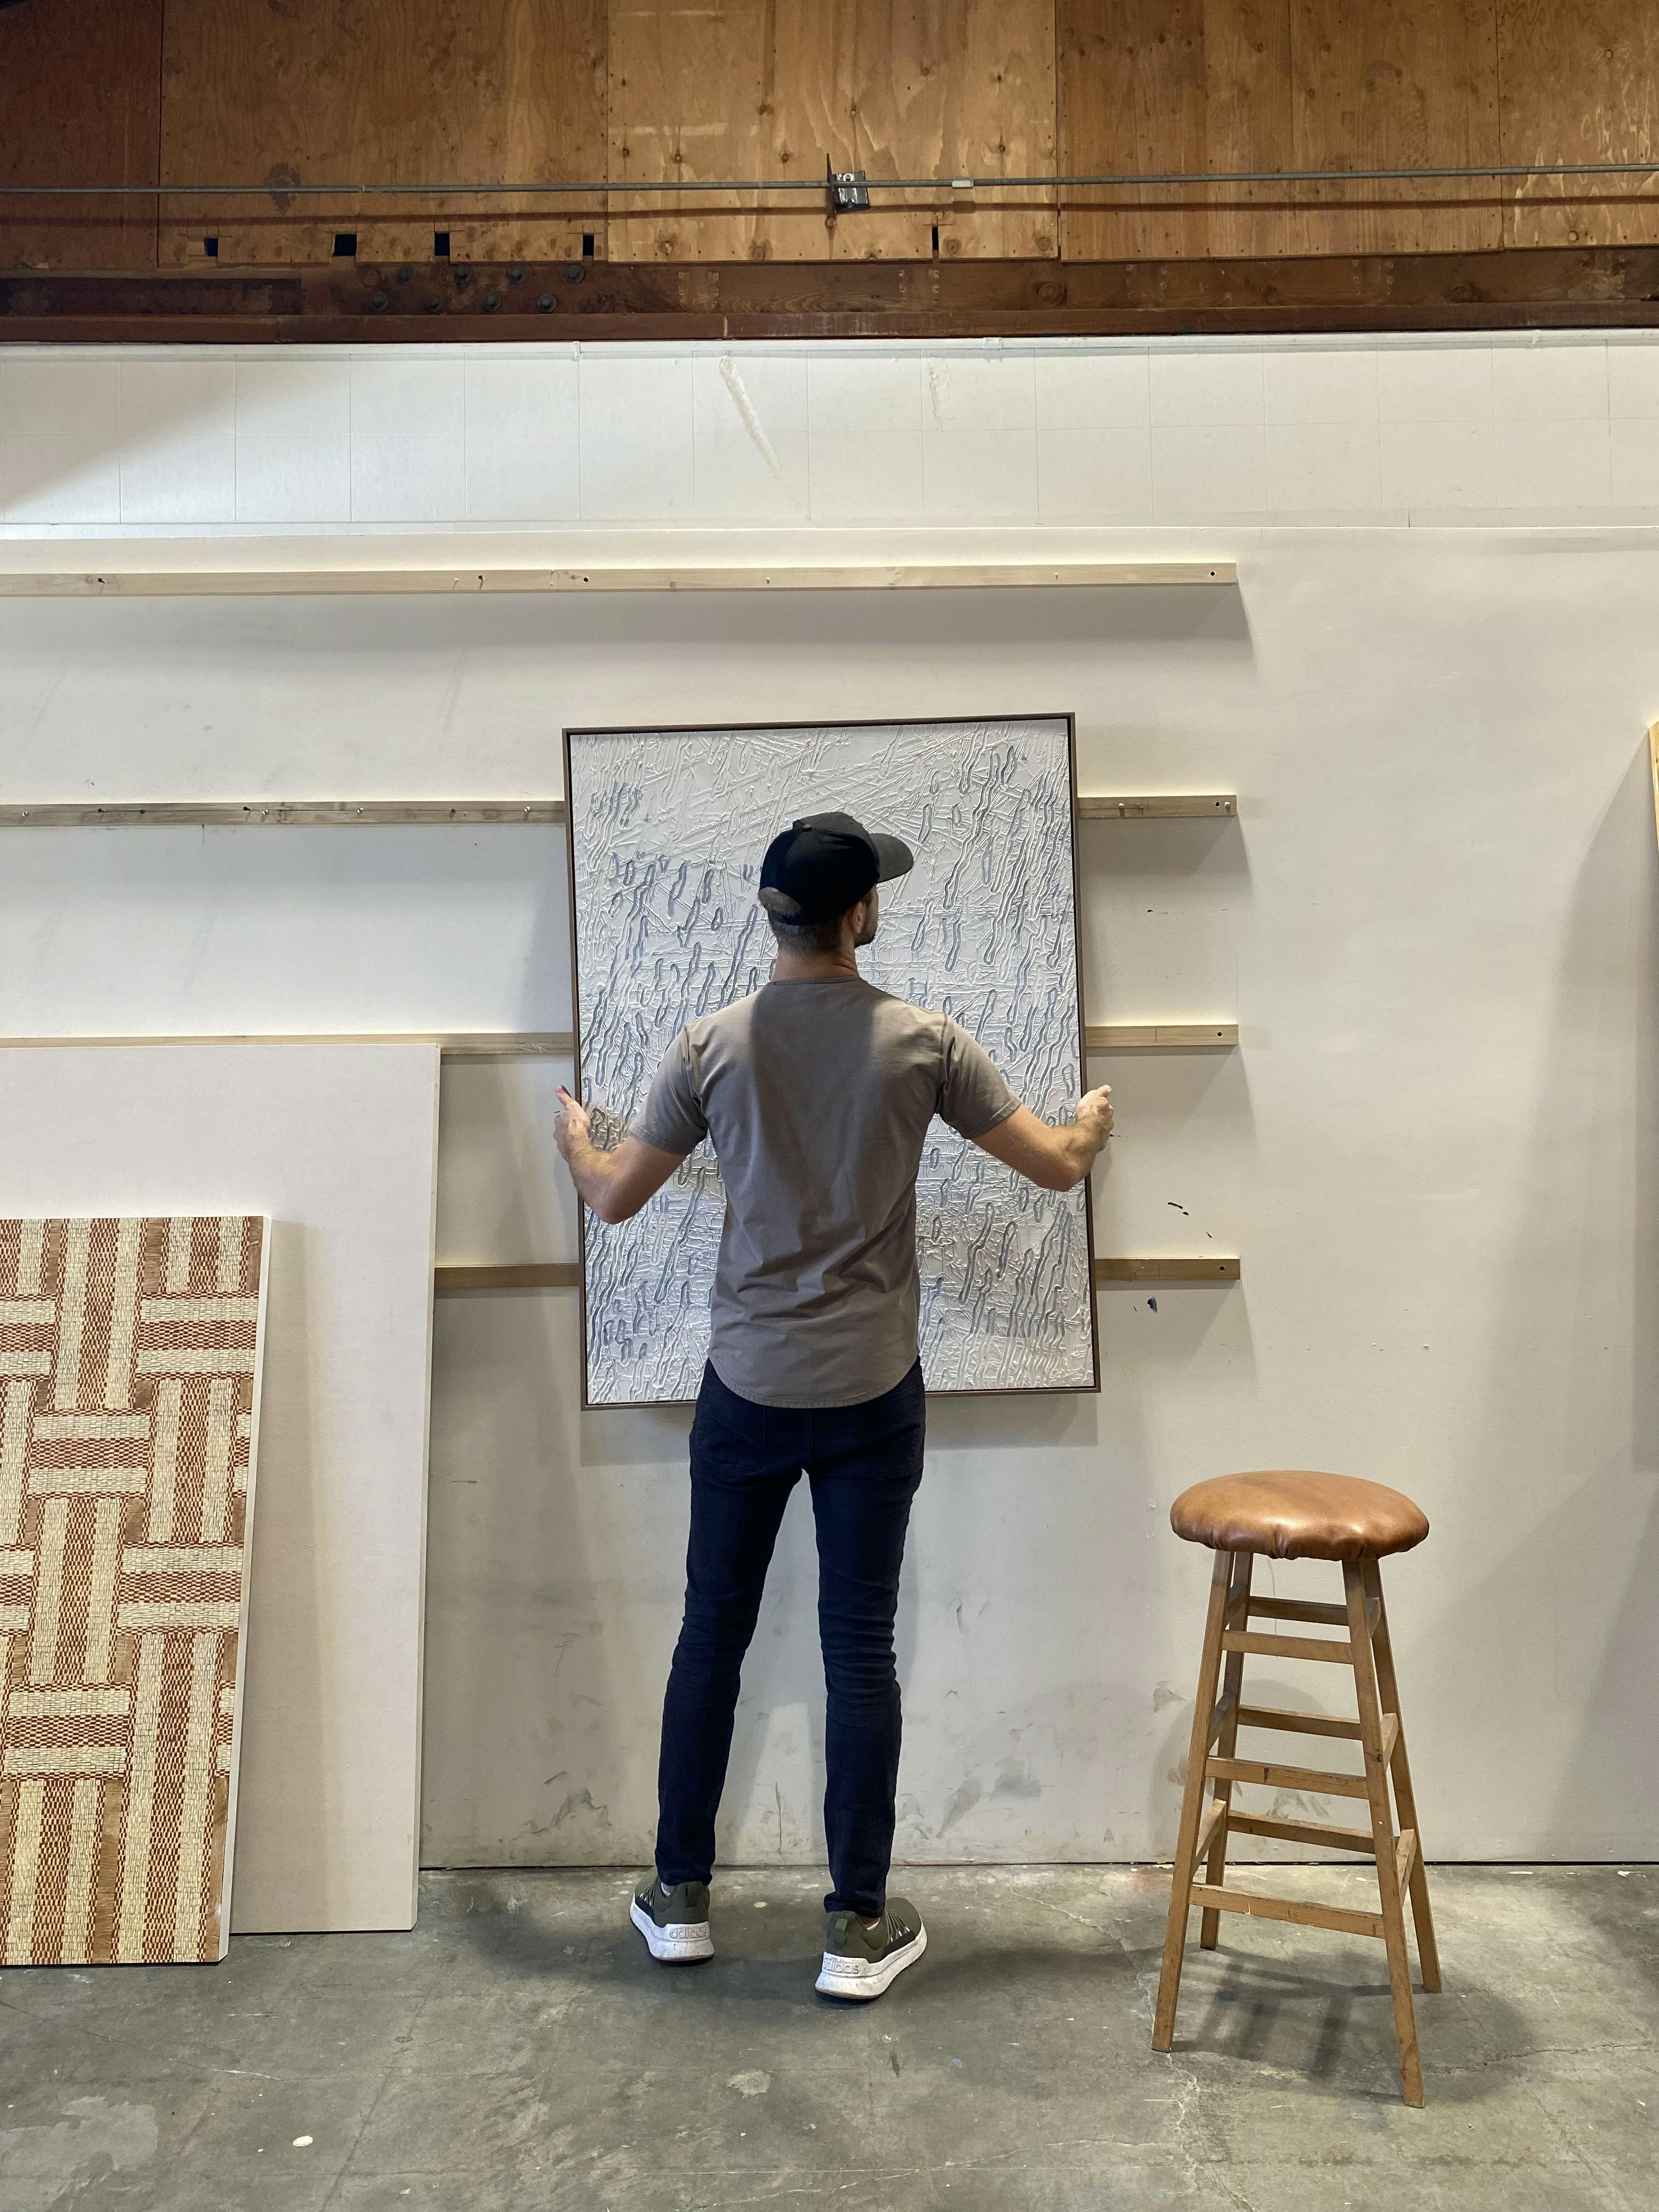 Artist Blake Aaseby in his studio carrying a large, gray textured painting.